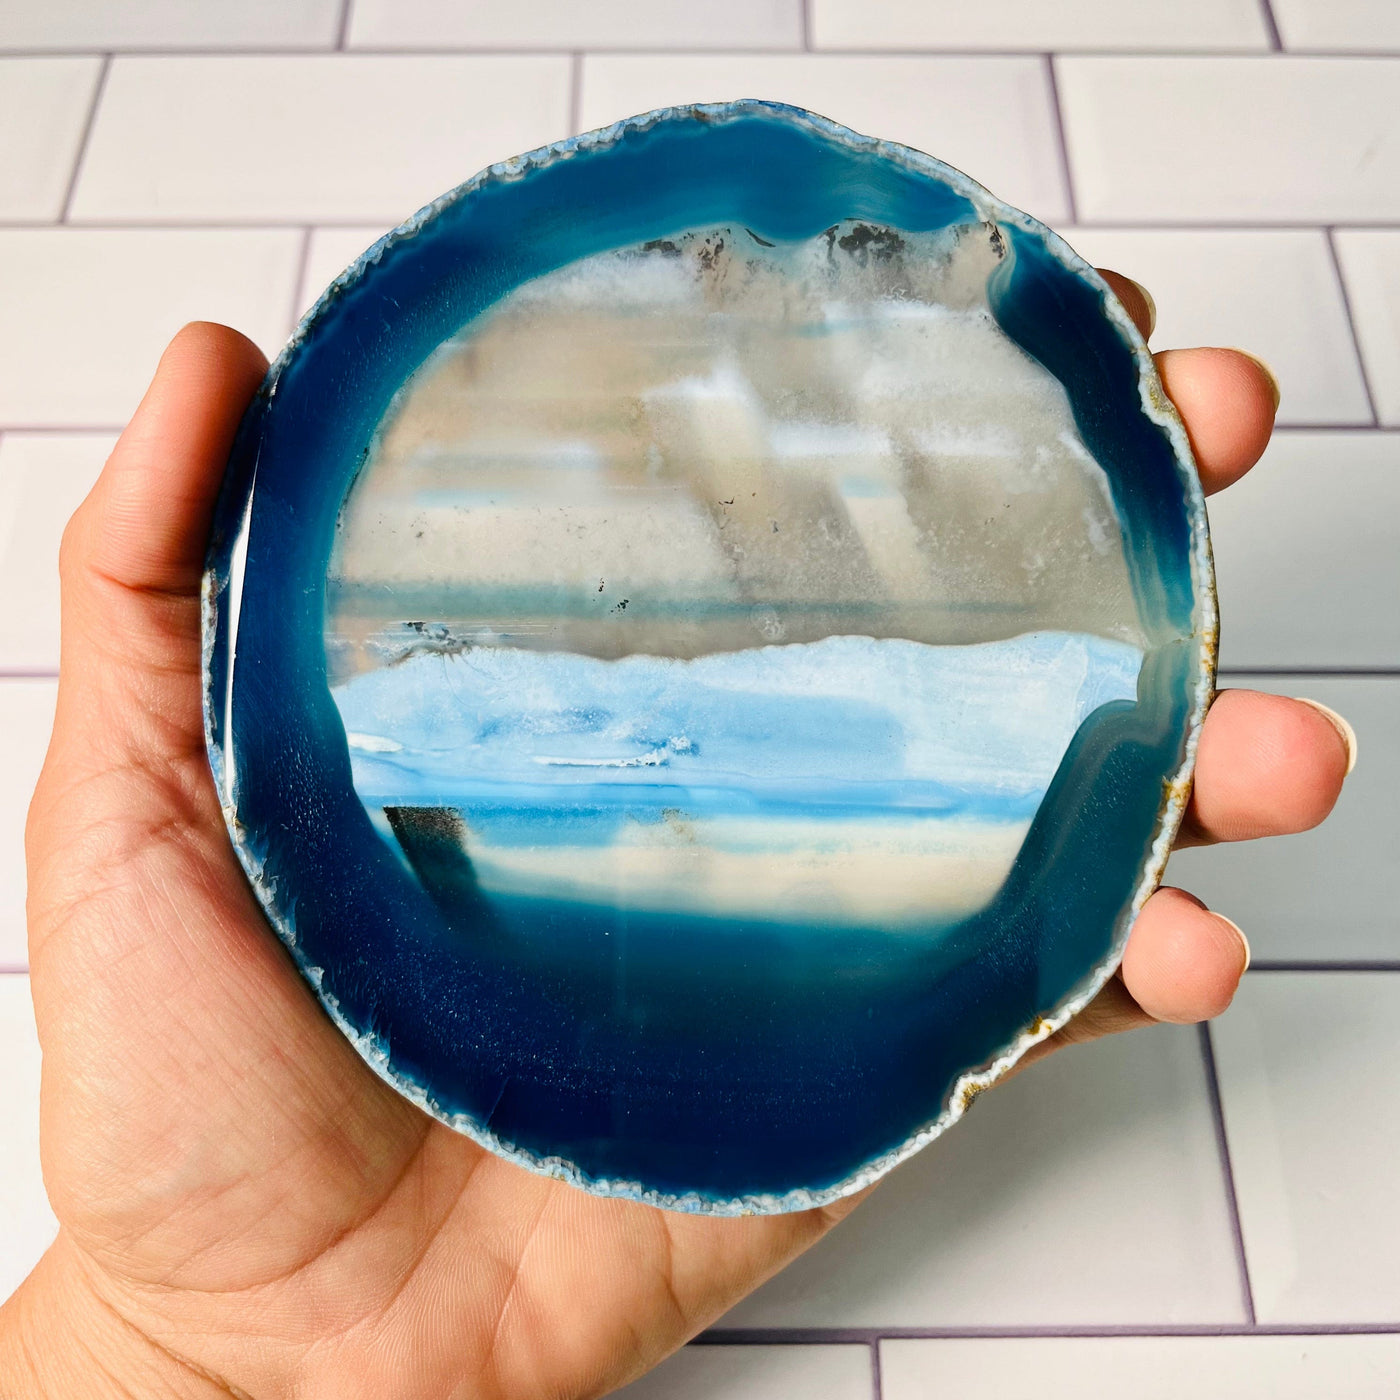 Back view of largest Agate Slice, blue grey and greenish hues. Held in a woman's hand.